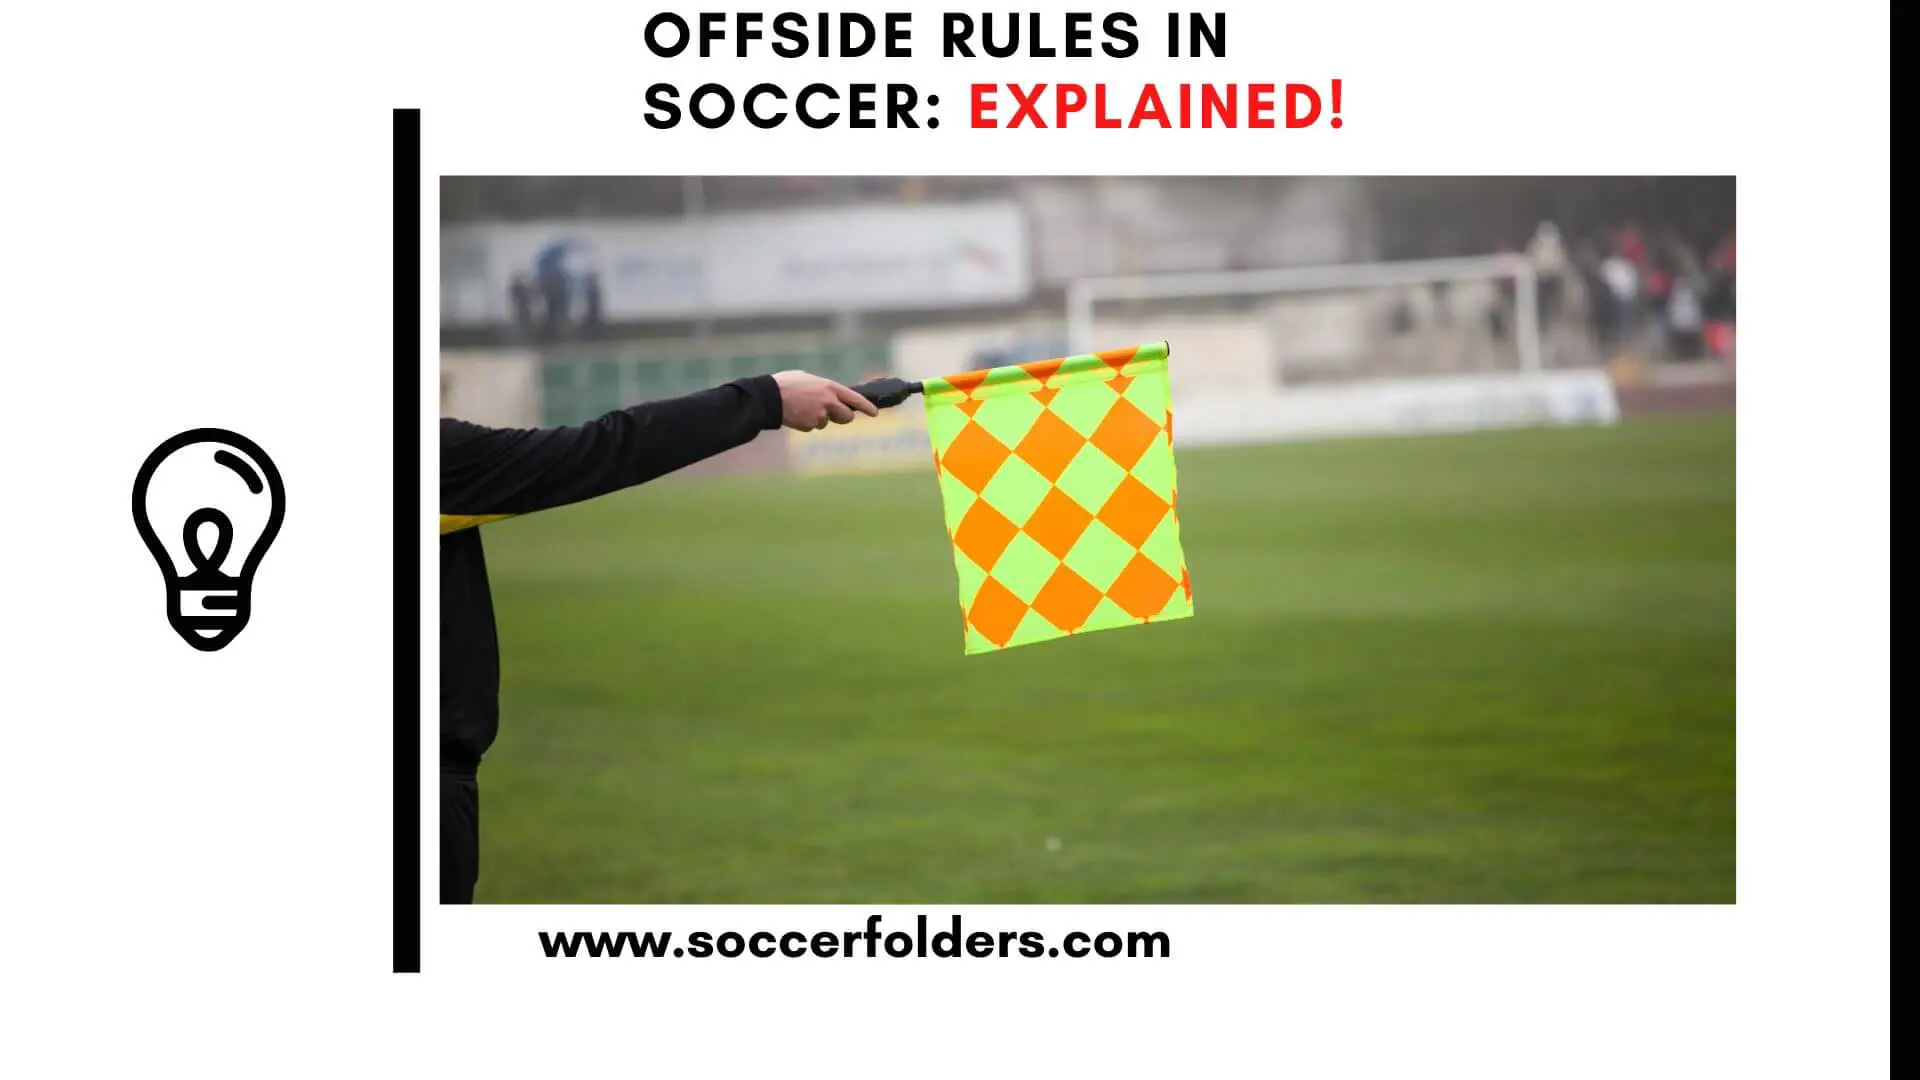 Offside rules in soccer - Featured Image